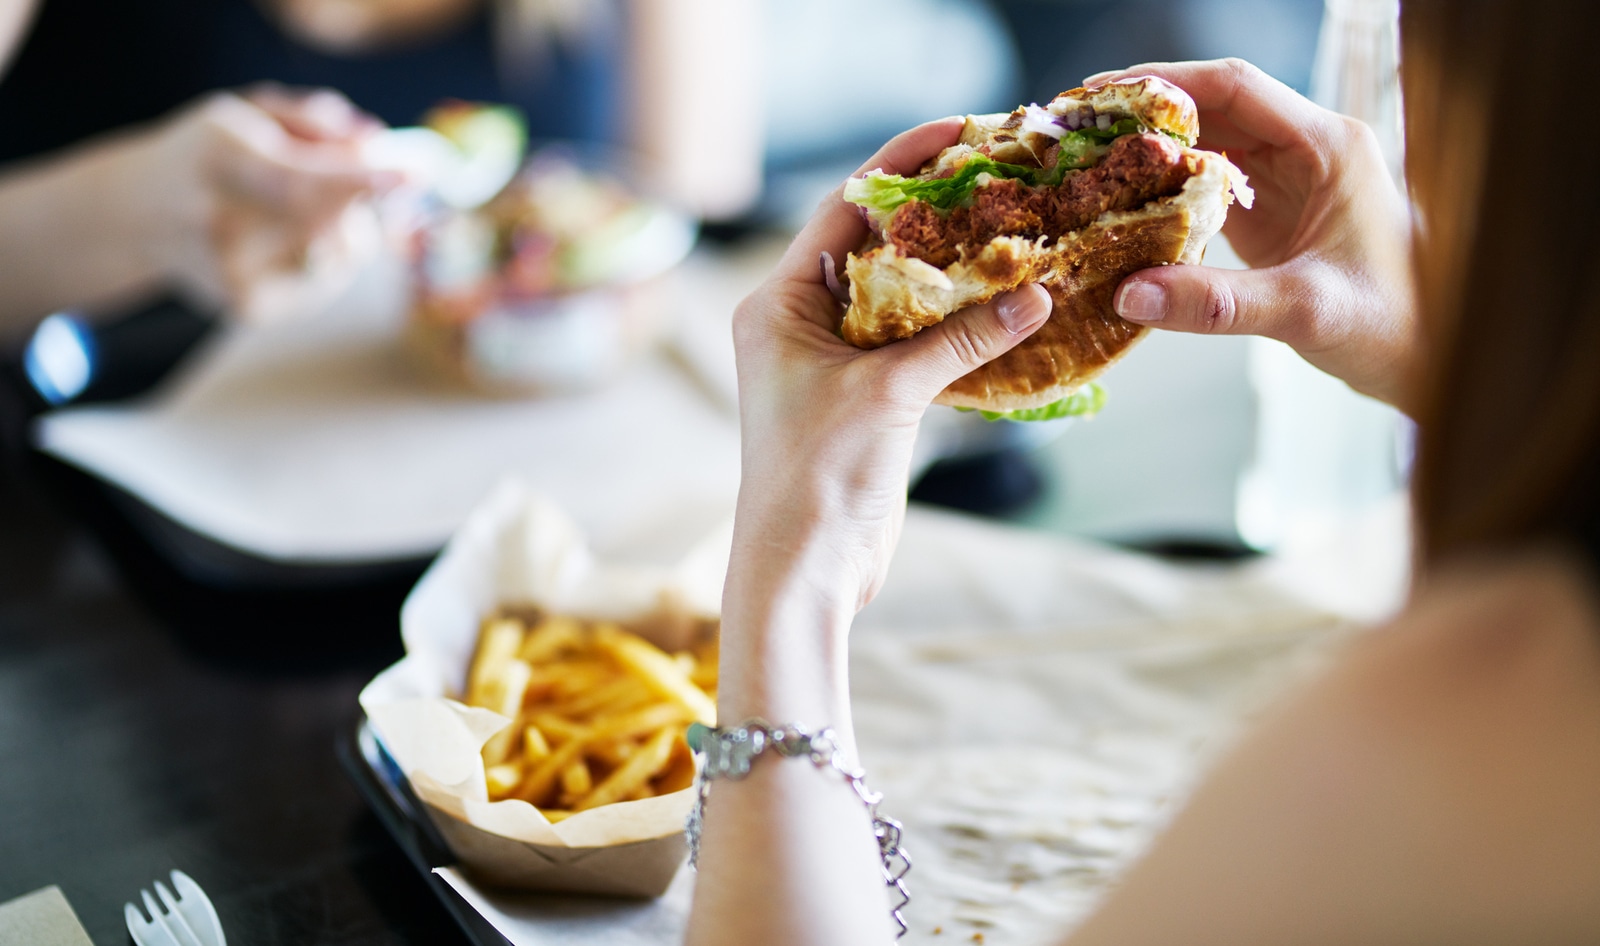 Plant-Based Fast-Food Options Saved More Than 600,000 Animals in 2021